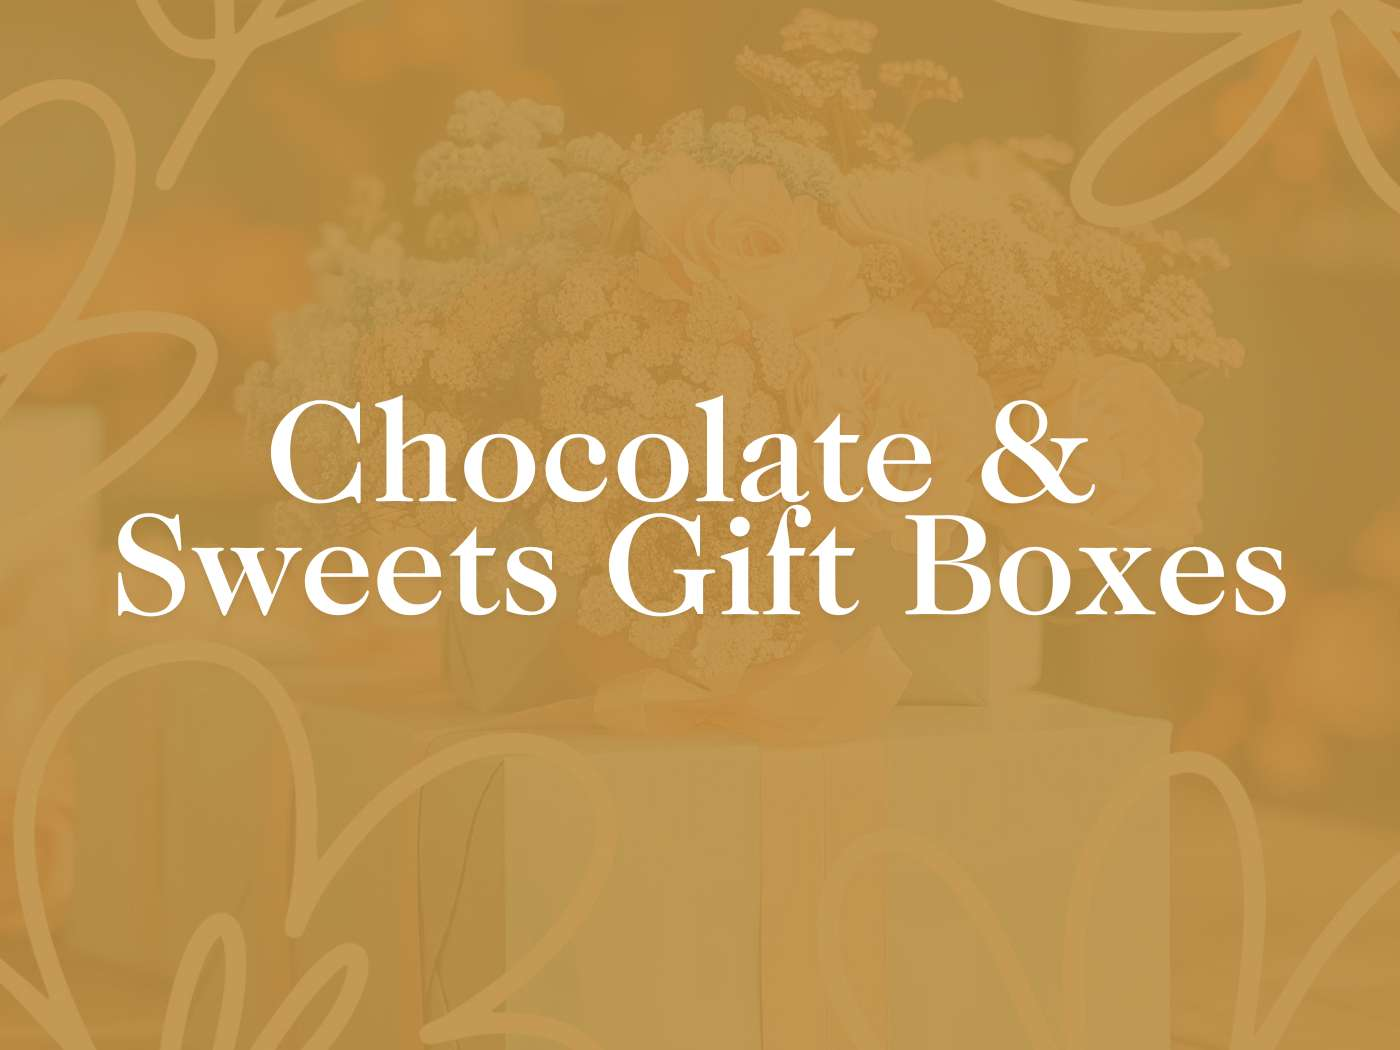 Assorted Milk Chocolate and Sweets Gift Boxes Collection with Fabulous Flowers and Gifts, ideal for a Chocolate Lover's Gift Hamper."